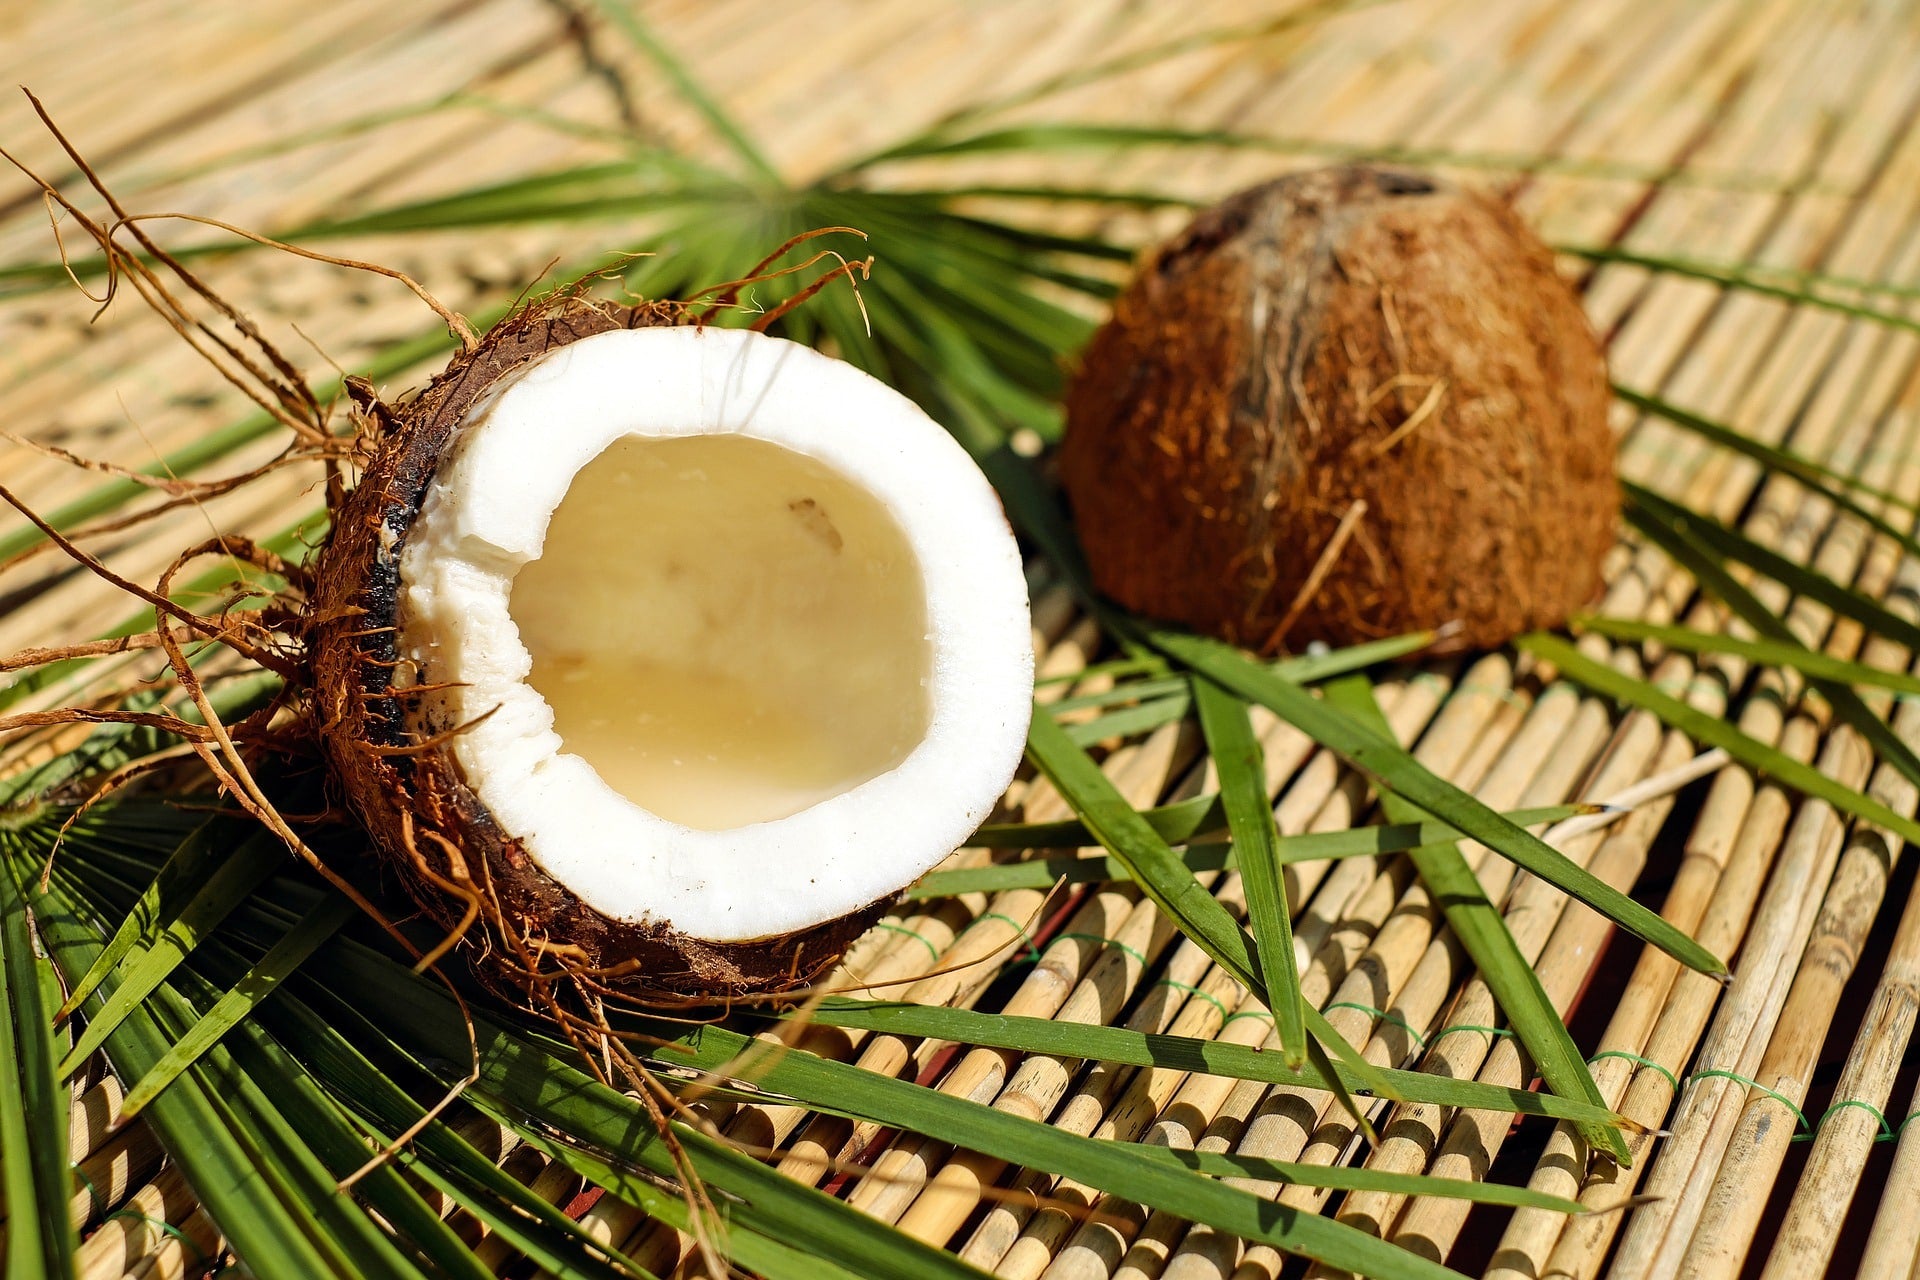 3 Studies That Demonstrate The Powerful Anti-Inflammatory Effects of Coconut Oil